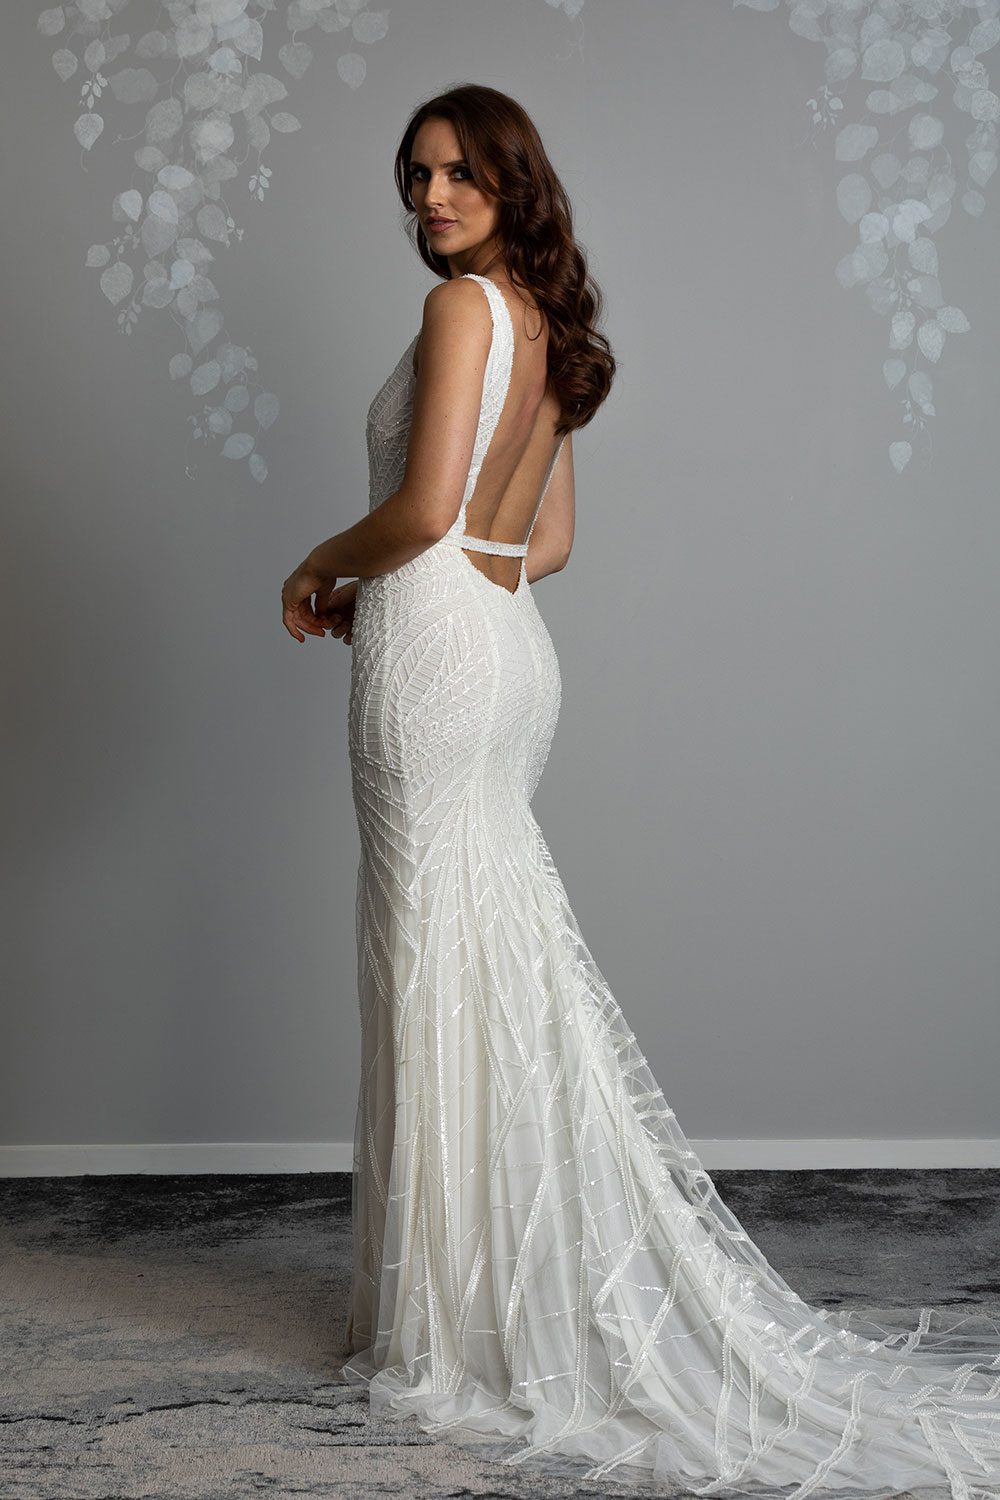 Elle Wedding gown from Vinka Design - Wedding dress with illusion neckline and deep plunge in the front with low back. Stunning beaded embroidery over a stretch base that sculpts and flatters the figure and falls into a beautiful flared train. Full length view of back of dress showing the beautiful flared train and low cut back